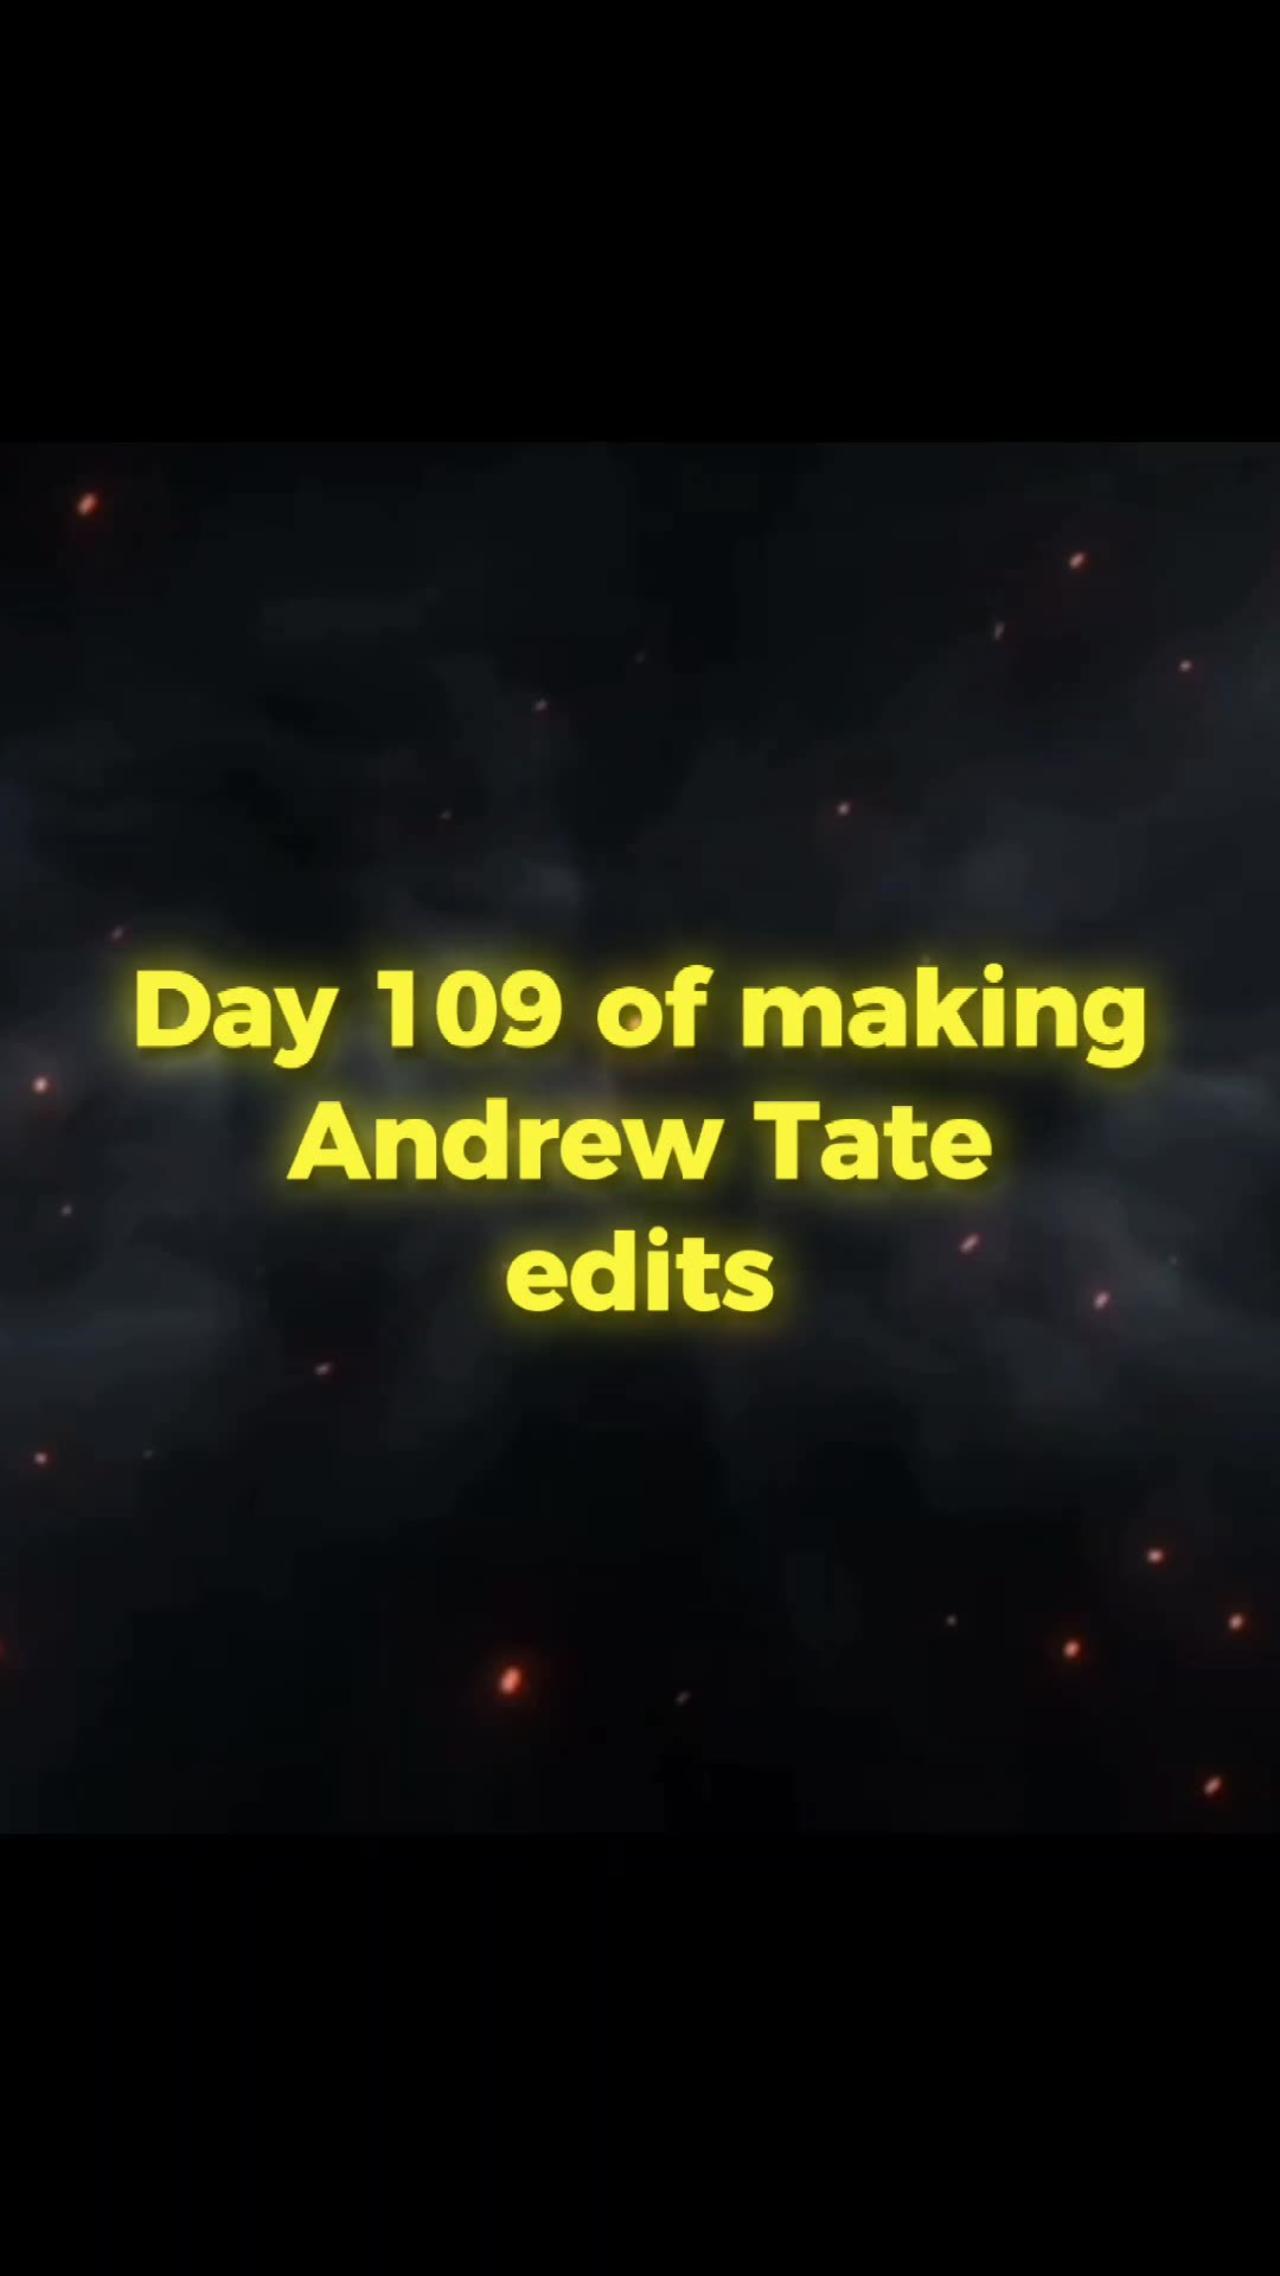 Day 109 of 75 hard challenge of making Andrew tate edits until he recognize ME.#tate #andrewtate